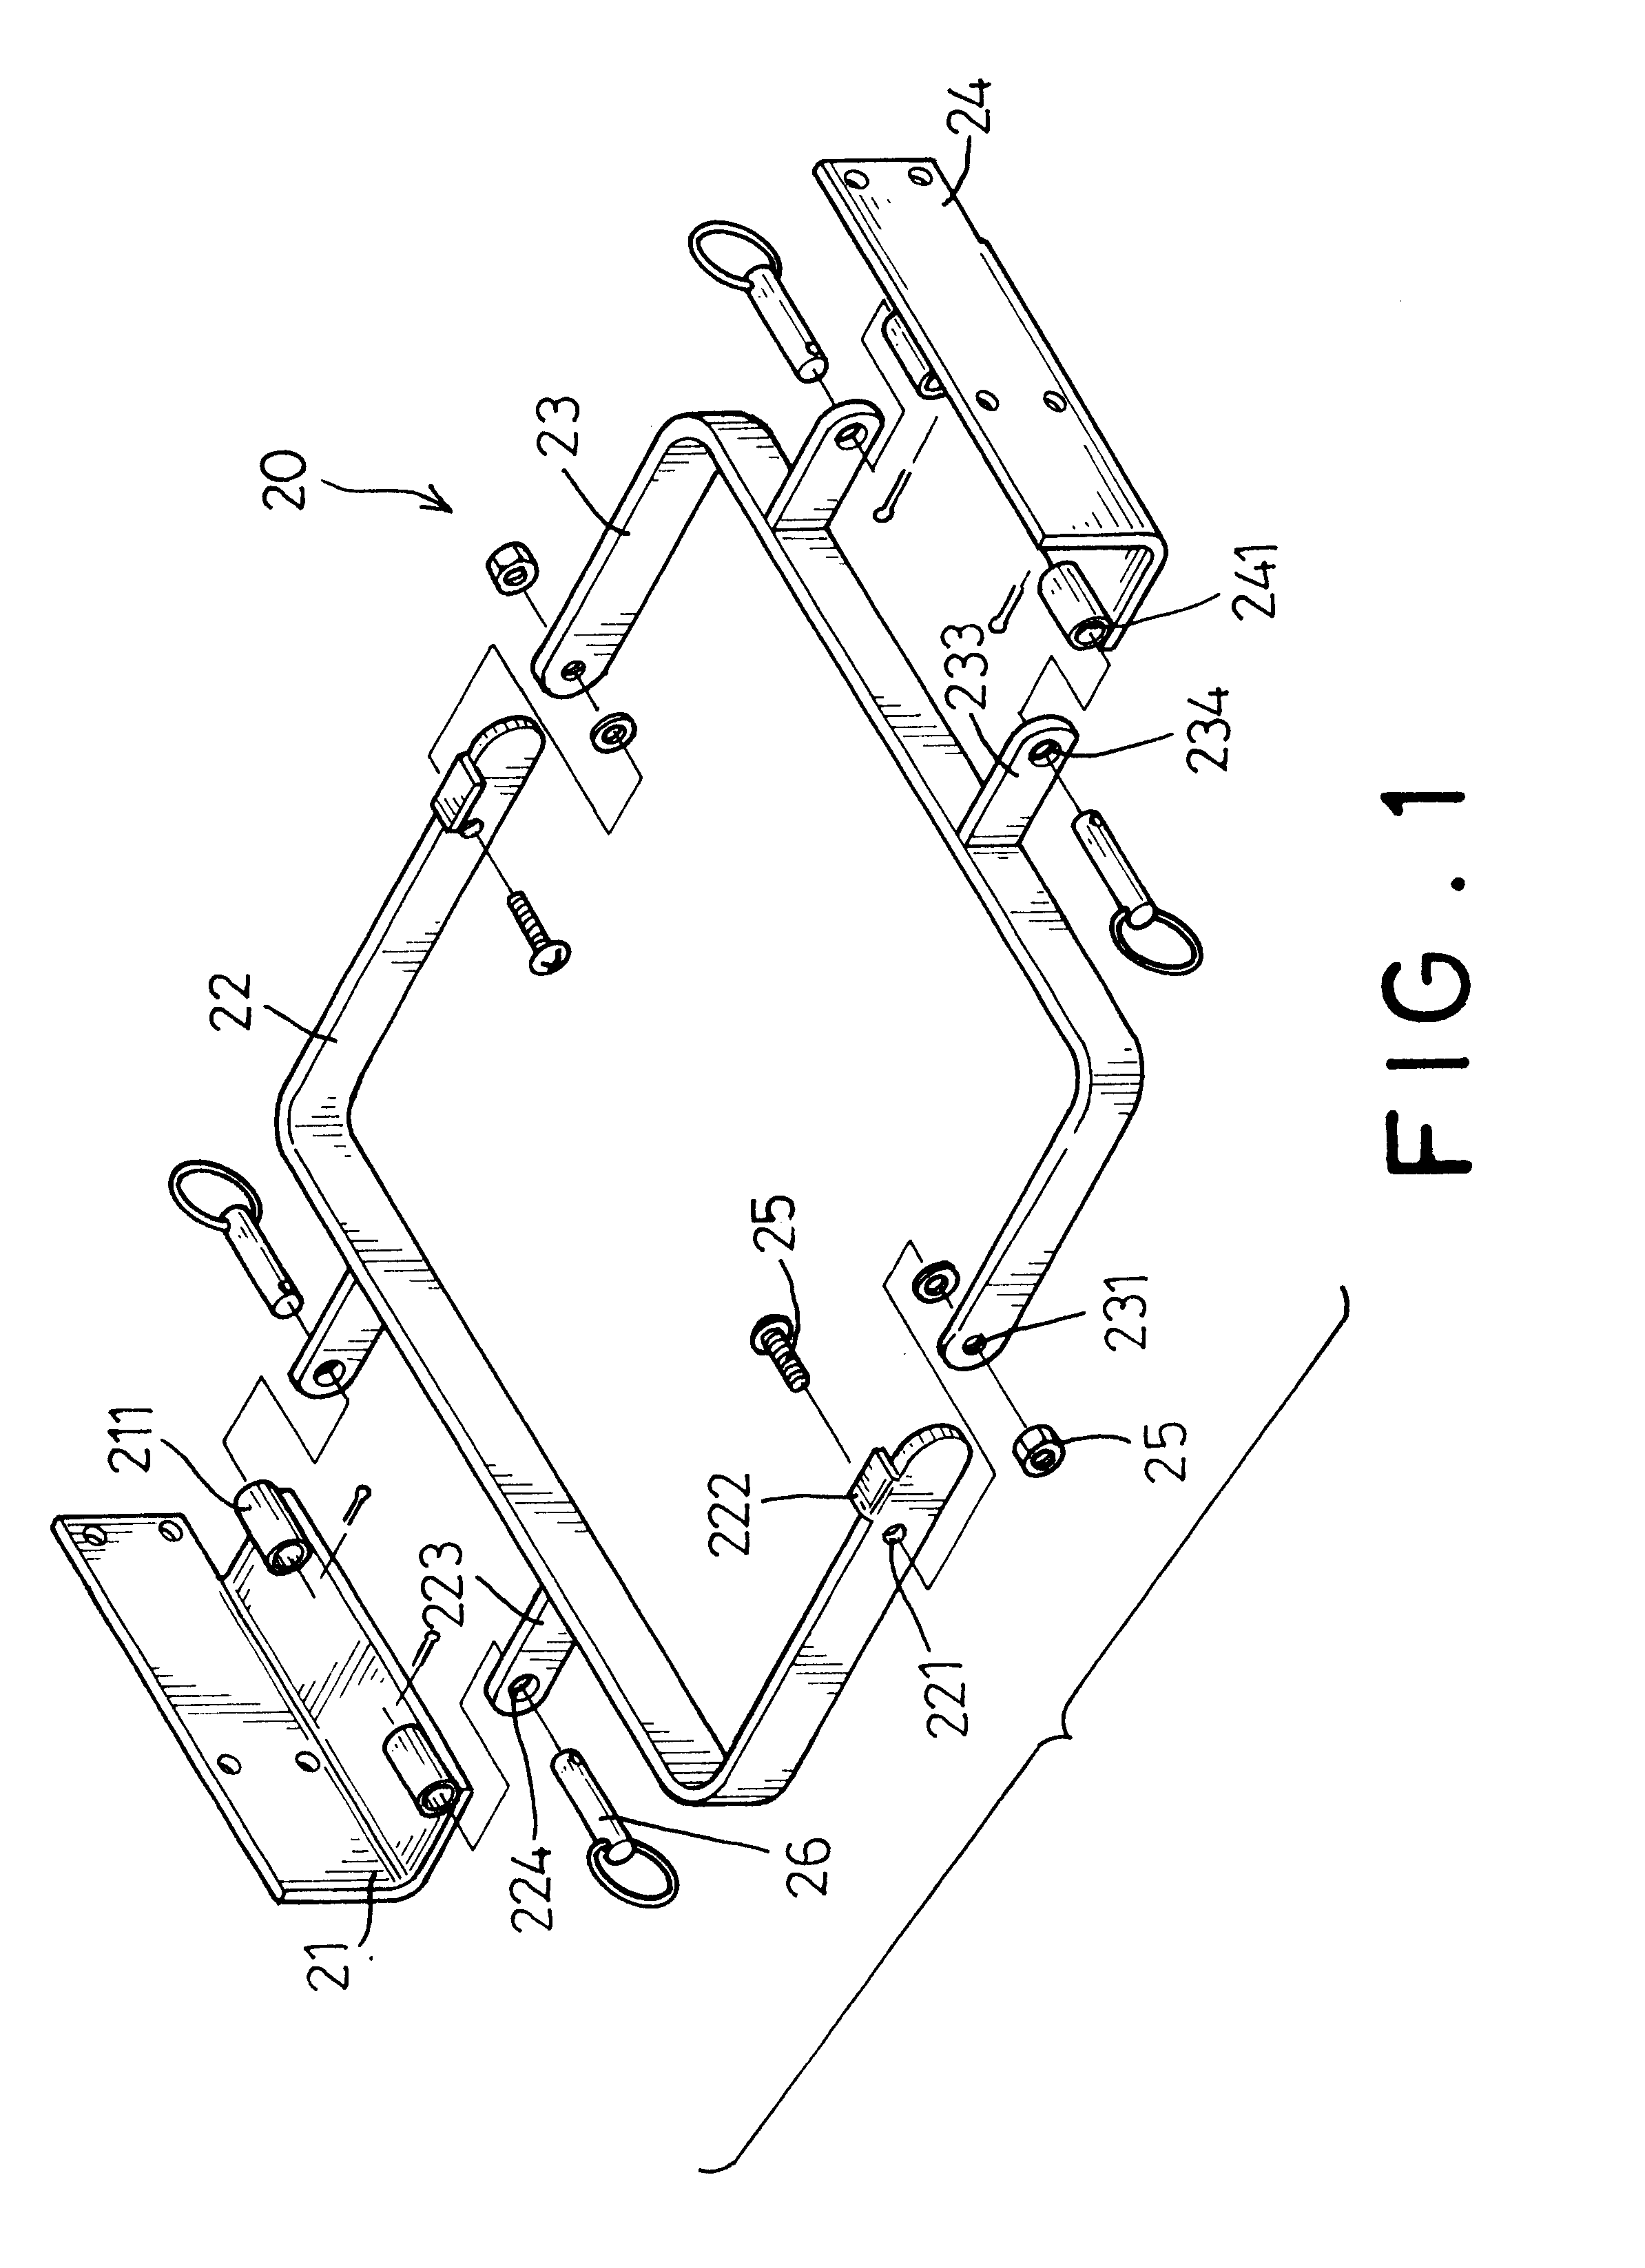 Battery compartment for a motorized wheel chair